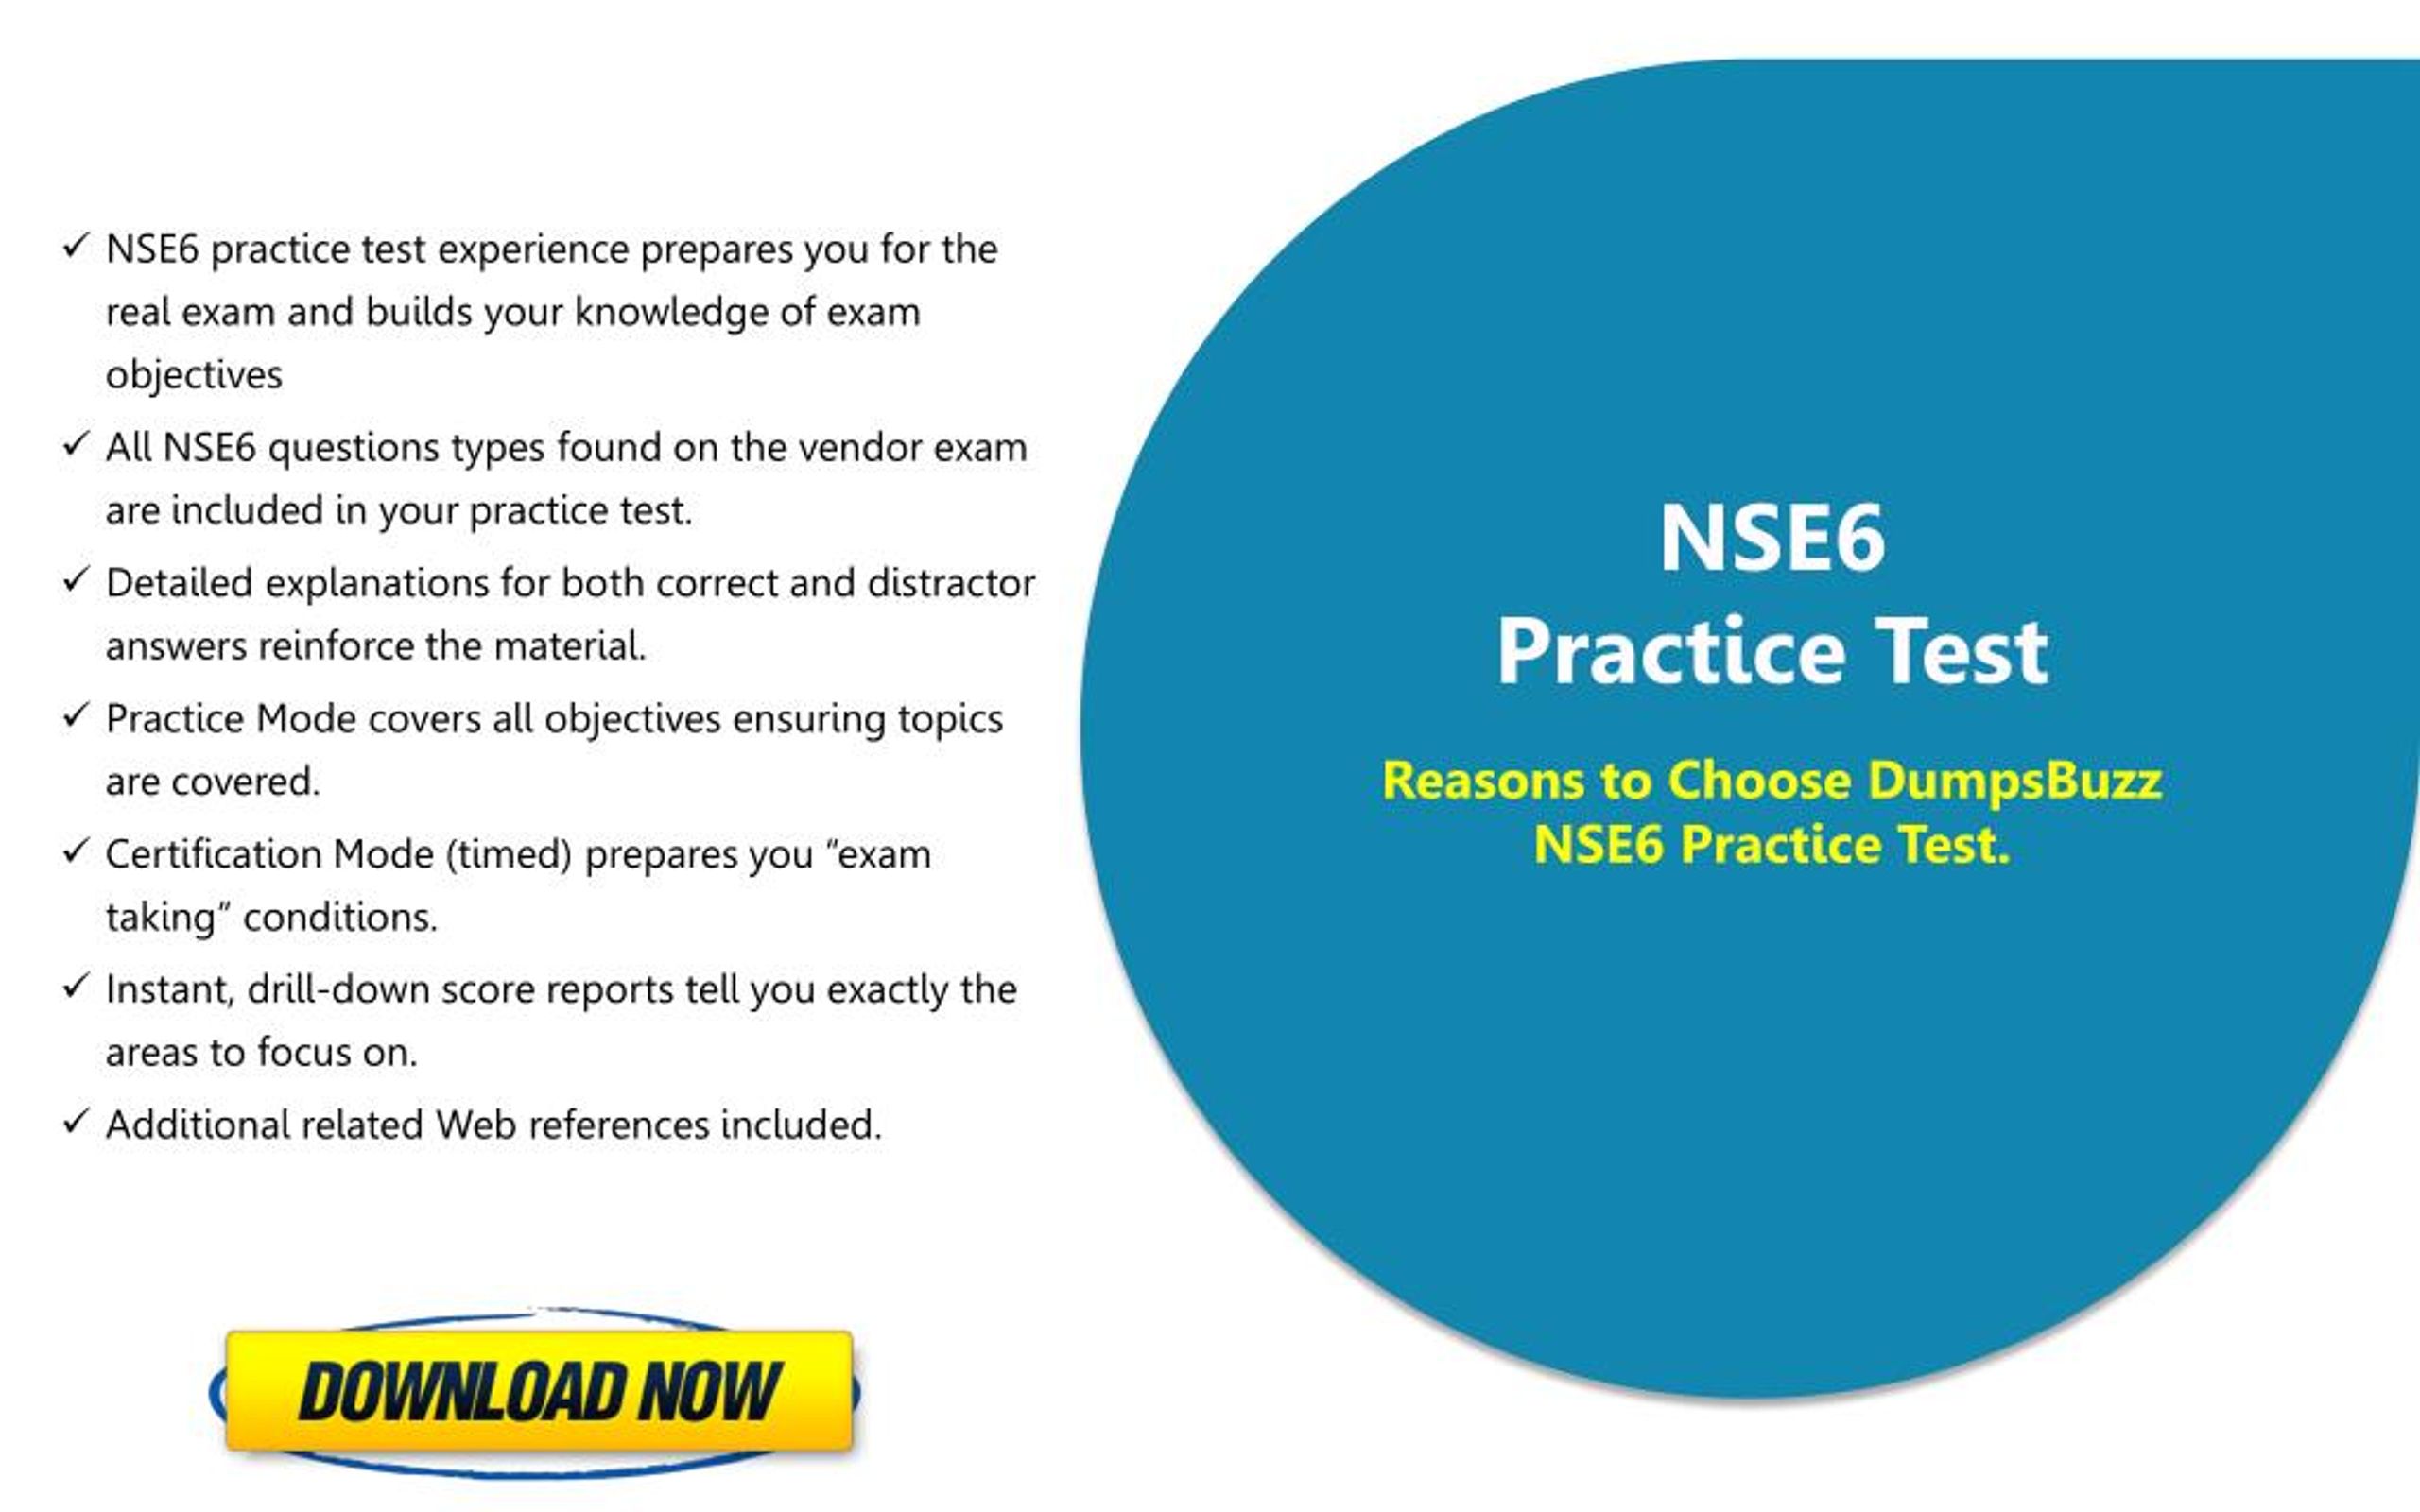 NSE6_WCS-7.0 Online Tests